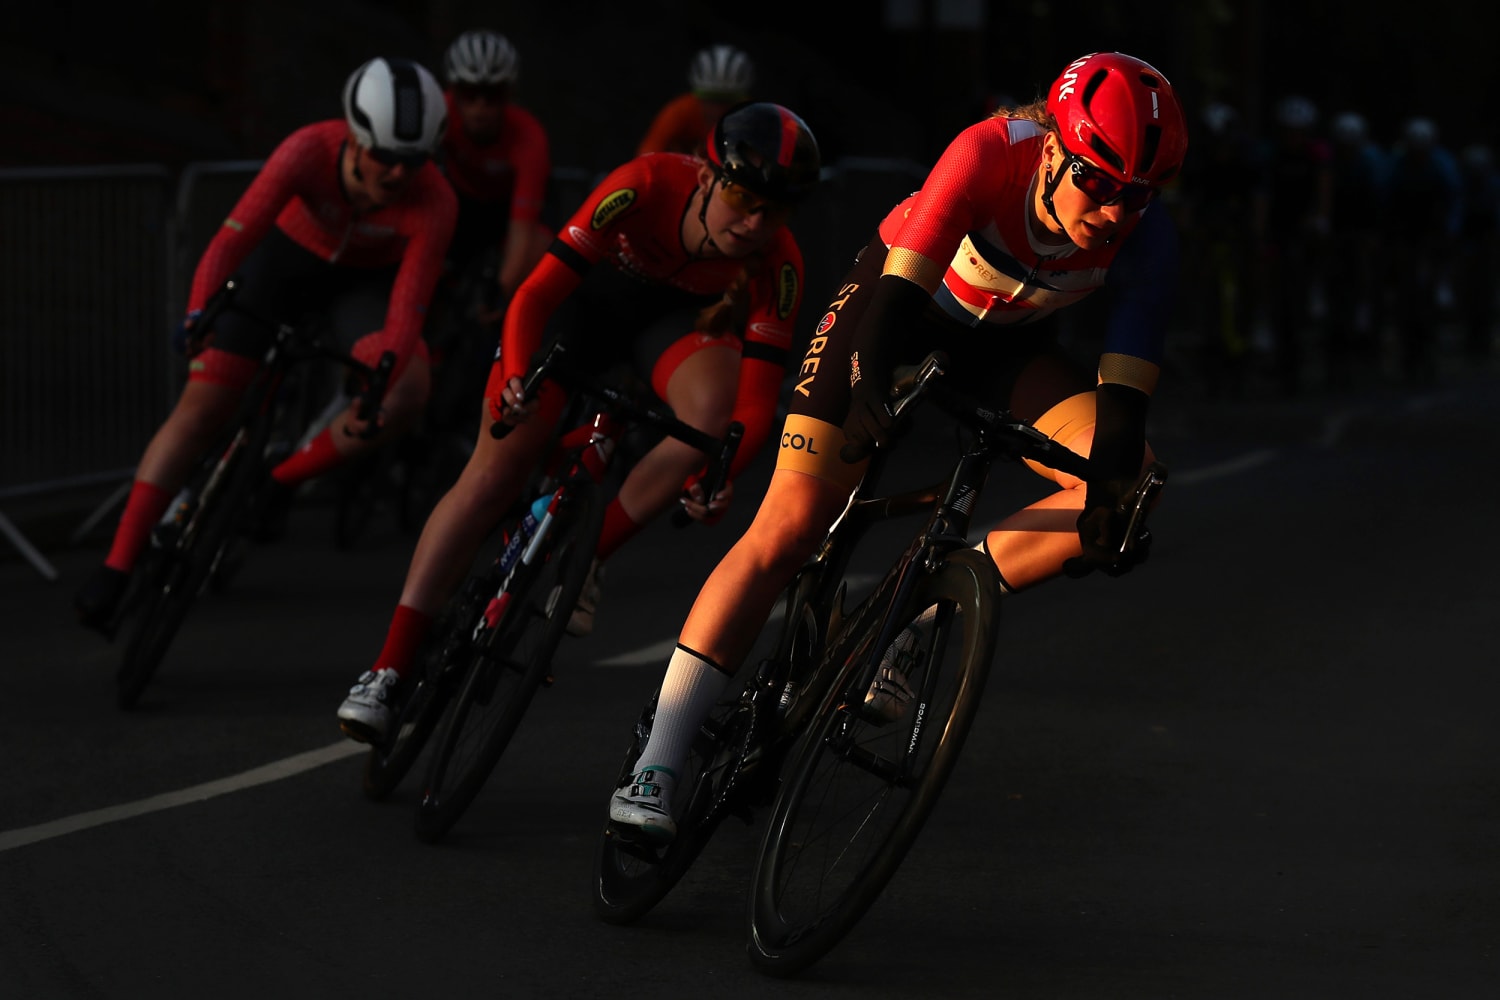 New British Cycling rules bar transgender women from competing in elite female events